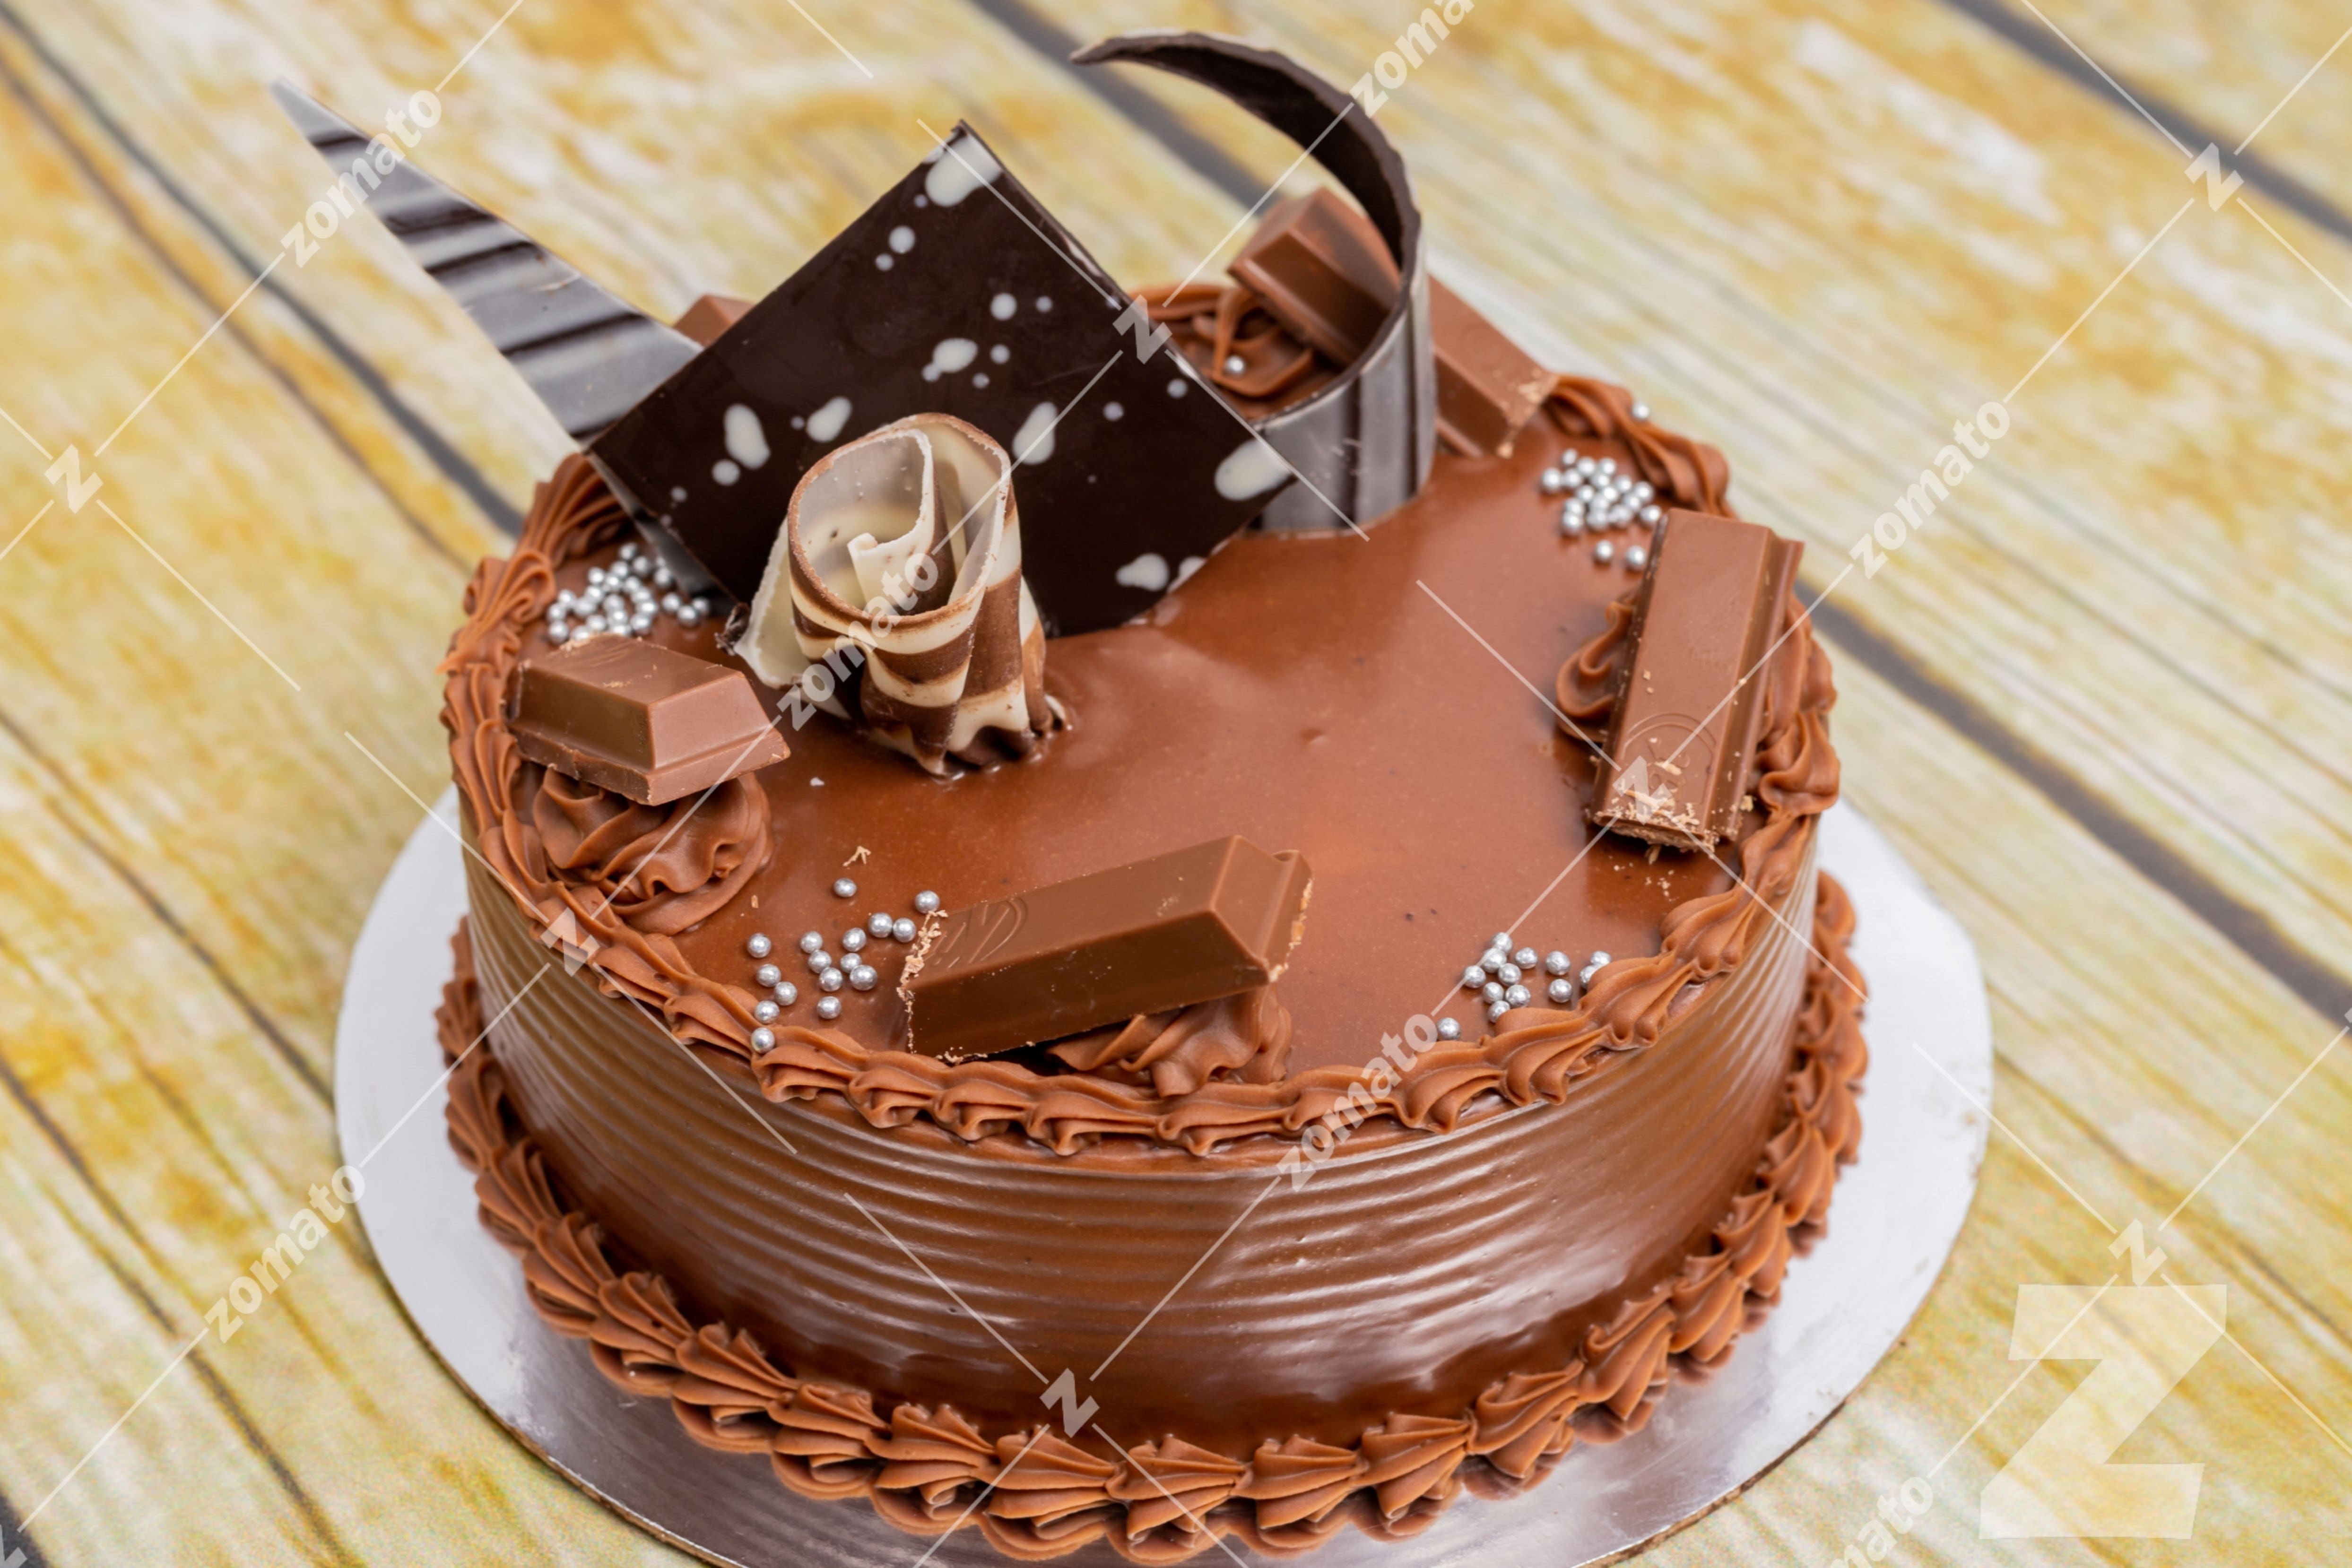 Destroyed cake delivered by Zomato and the executive team said, anything  happen in between the way is not Zomato responsibility | Consumer  Complaints Court